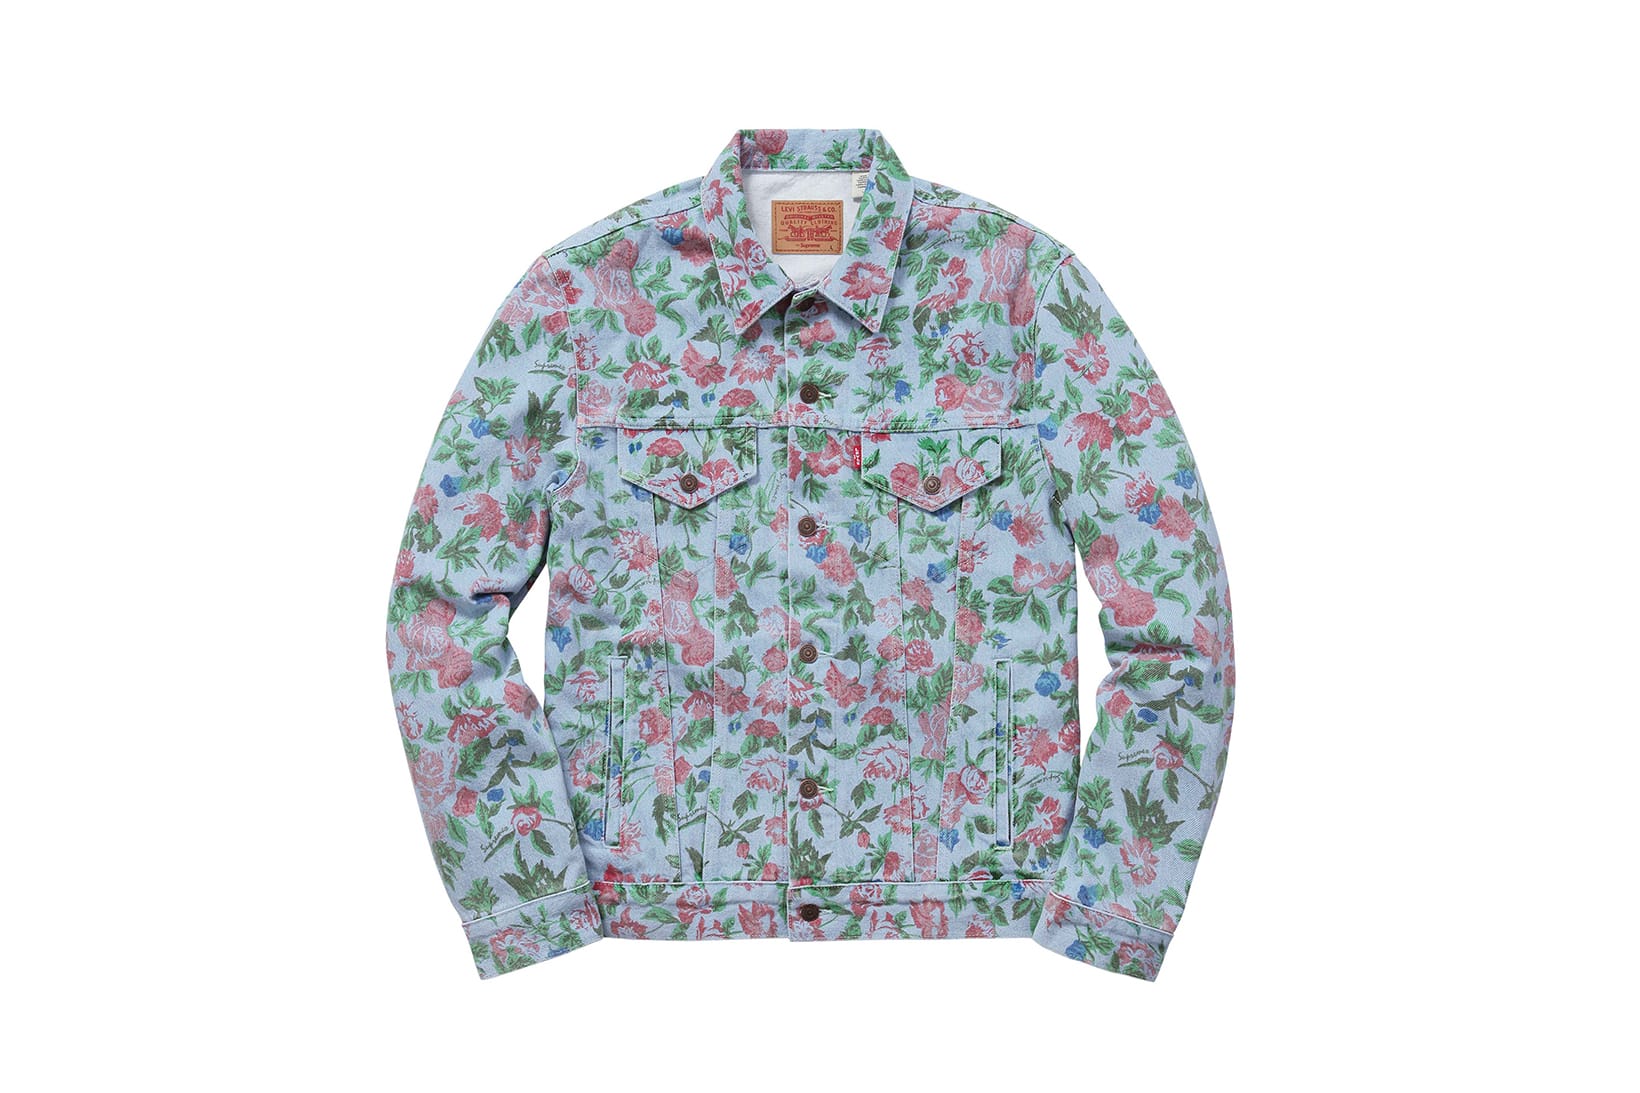 Supreme x Levi's 2016 Spring Summer Floral Collection | Hypebeast